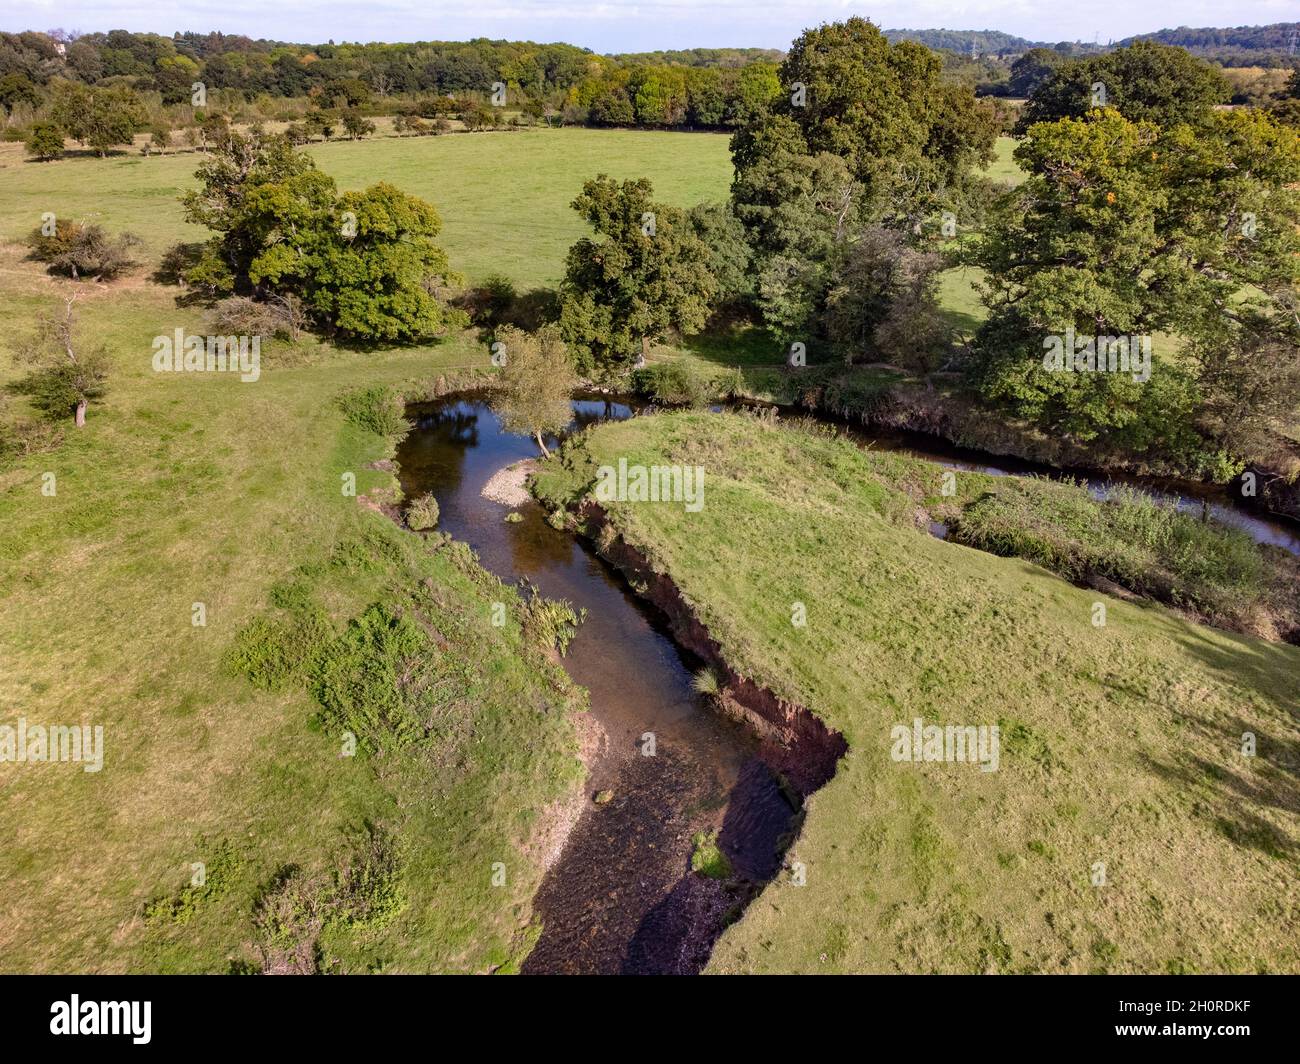 An aerial view of the small river Arrow running through farmland in Warwickshire, England. Stock Photo